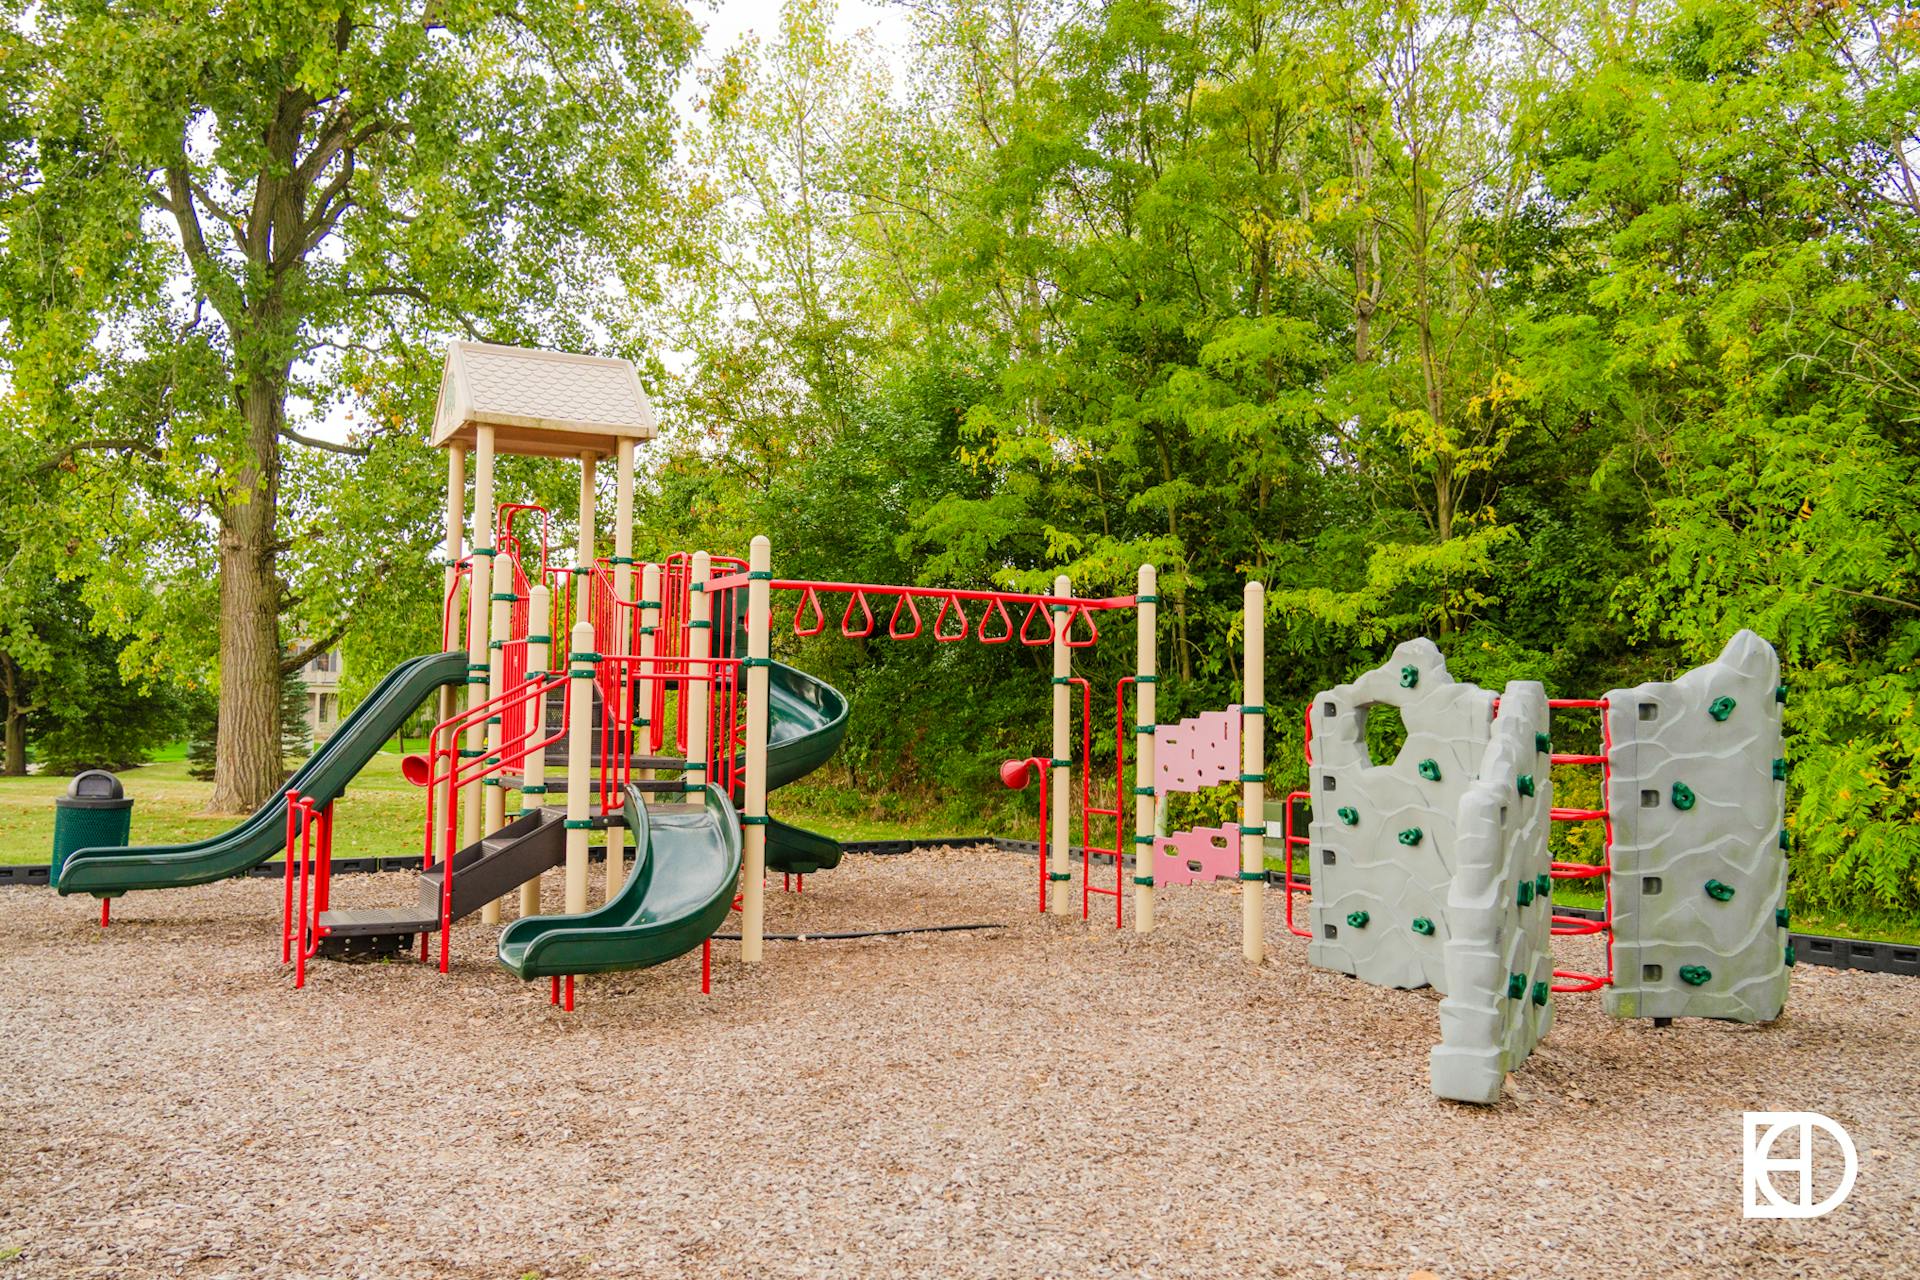 Photo of playground in The Willows neighborhood in Zionsville.